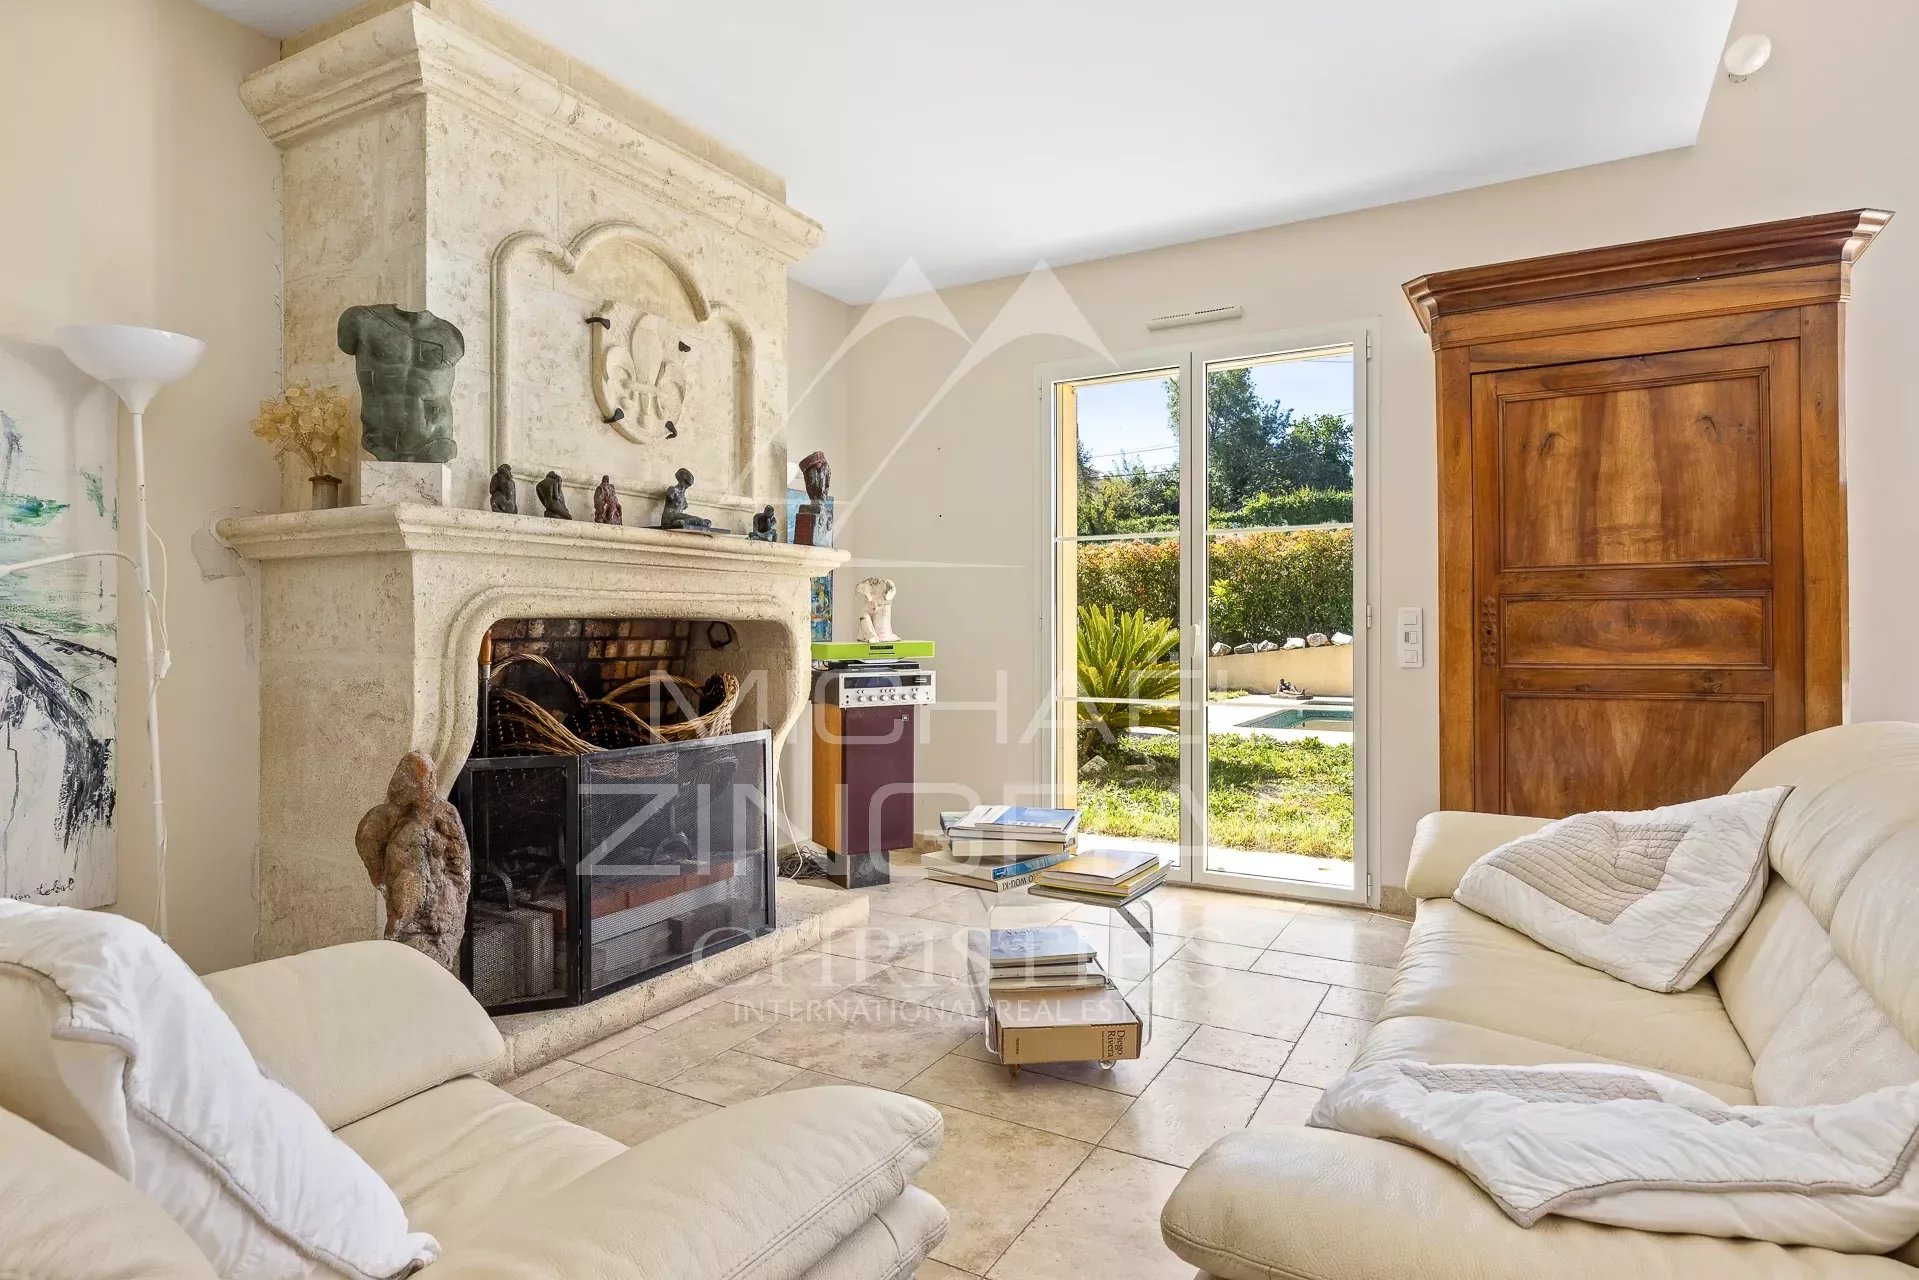 Close to Cannes - Heights of Mandelieu - Villa Tanneron